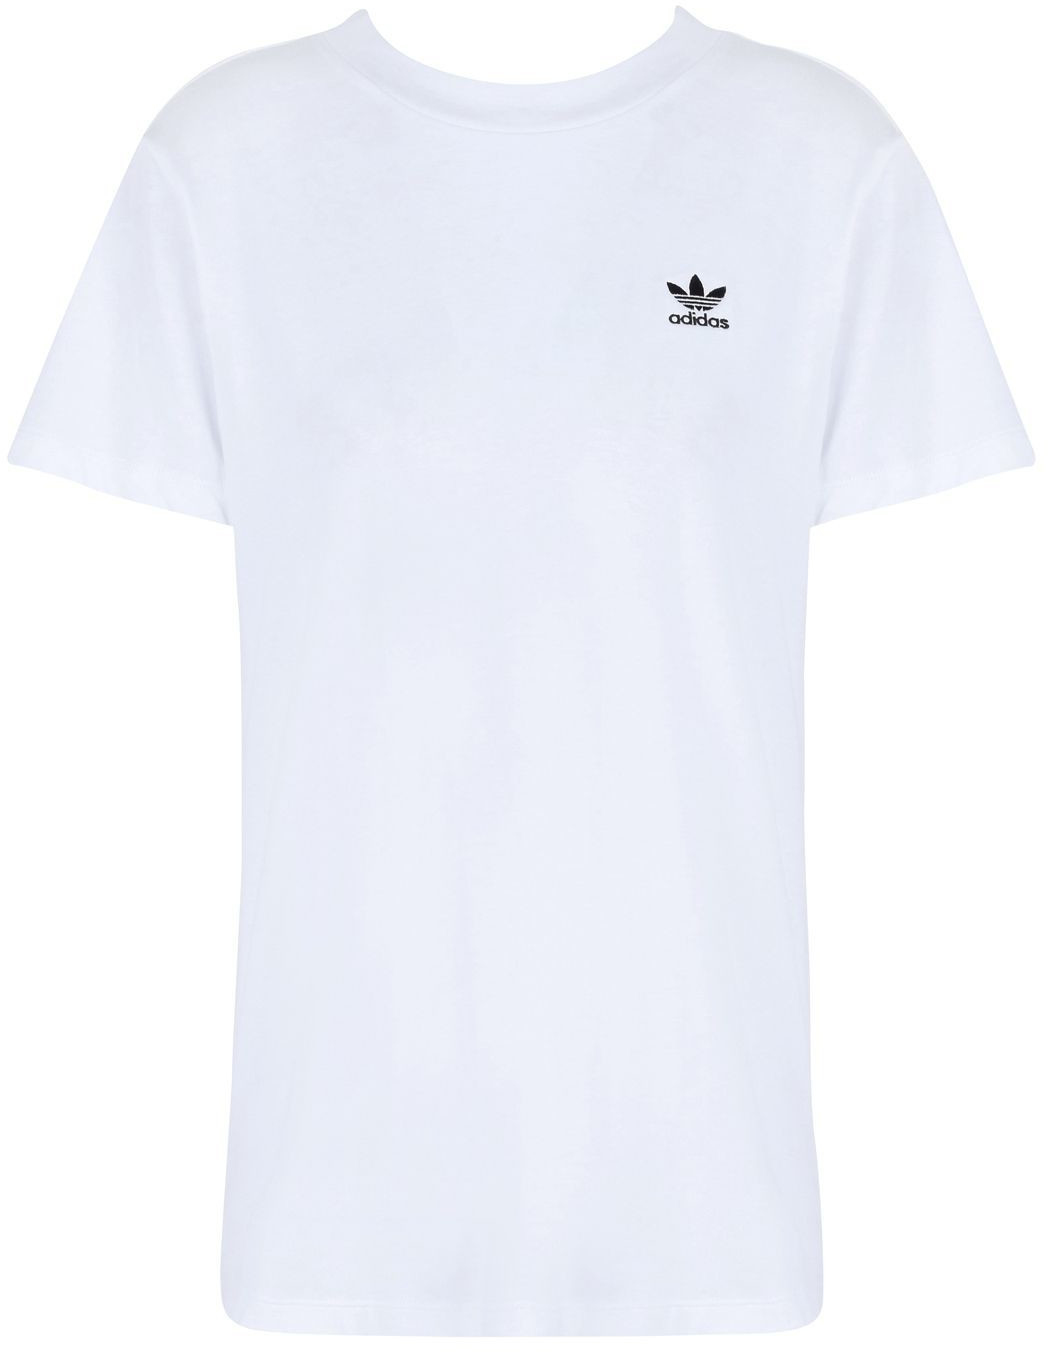 Adidas Originals Styling Complements T-Shirt